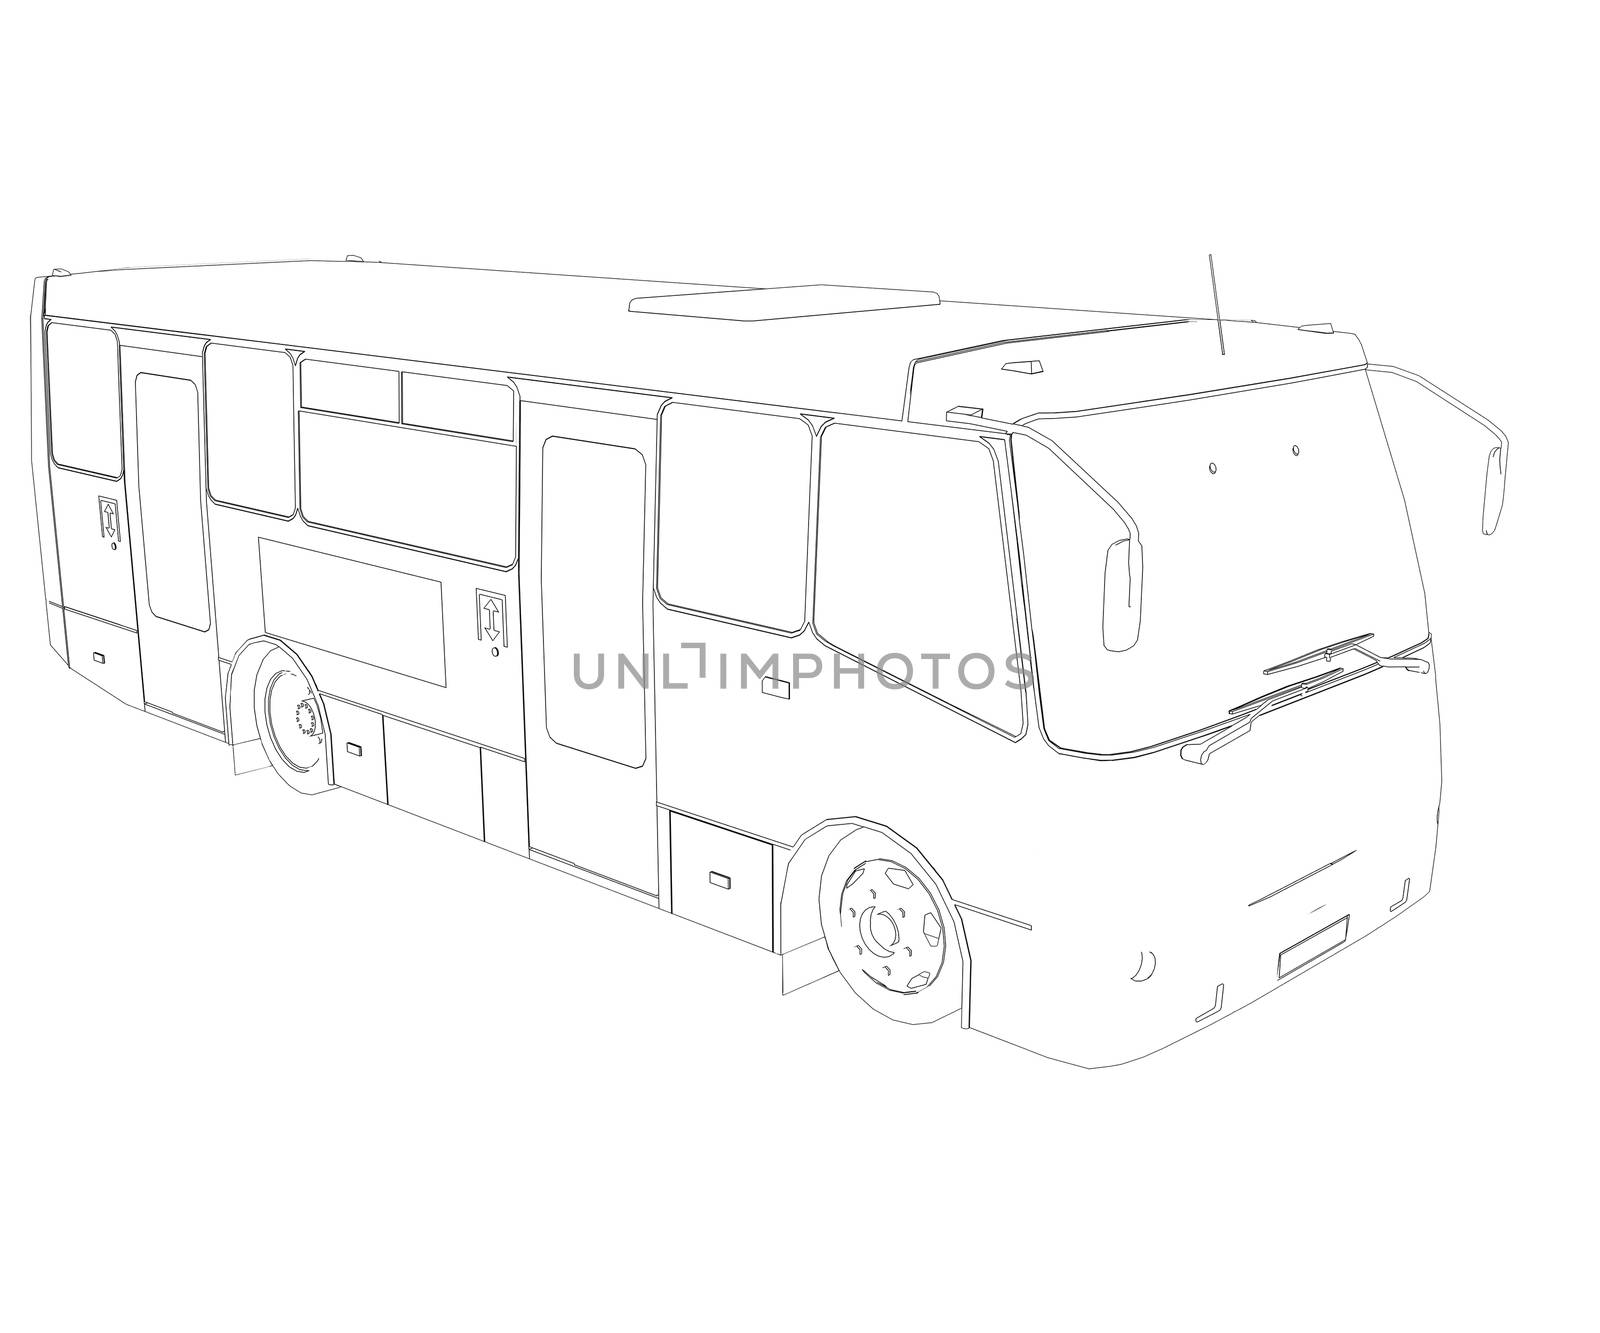 Big bus. Wire frame by cherezoff